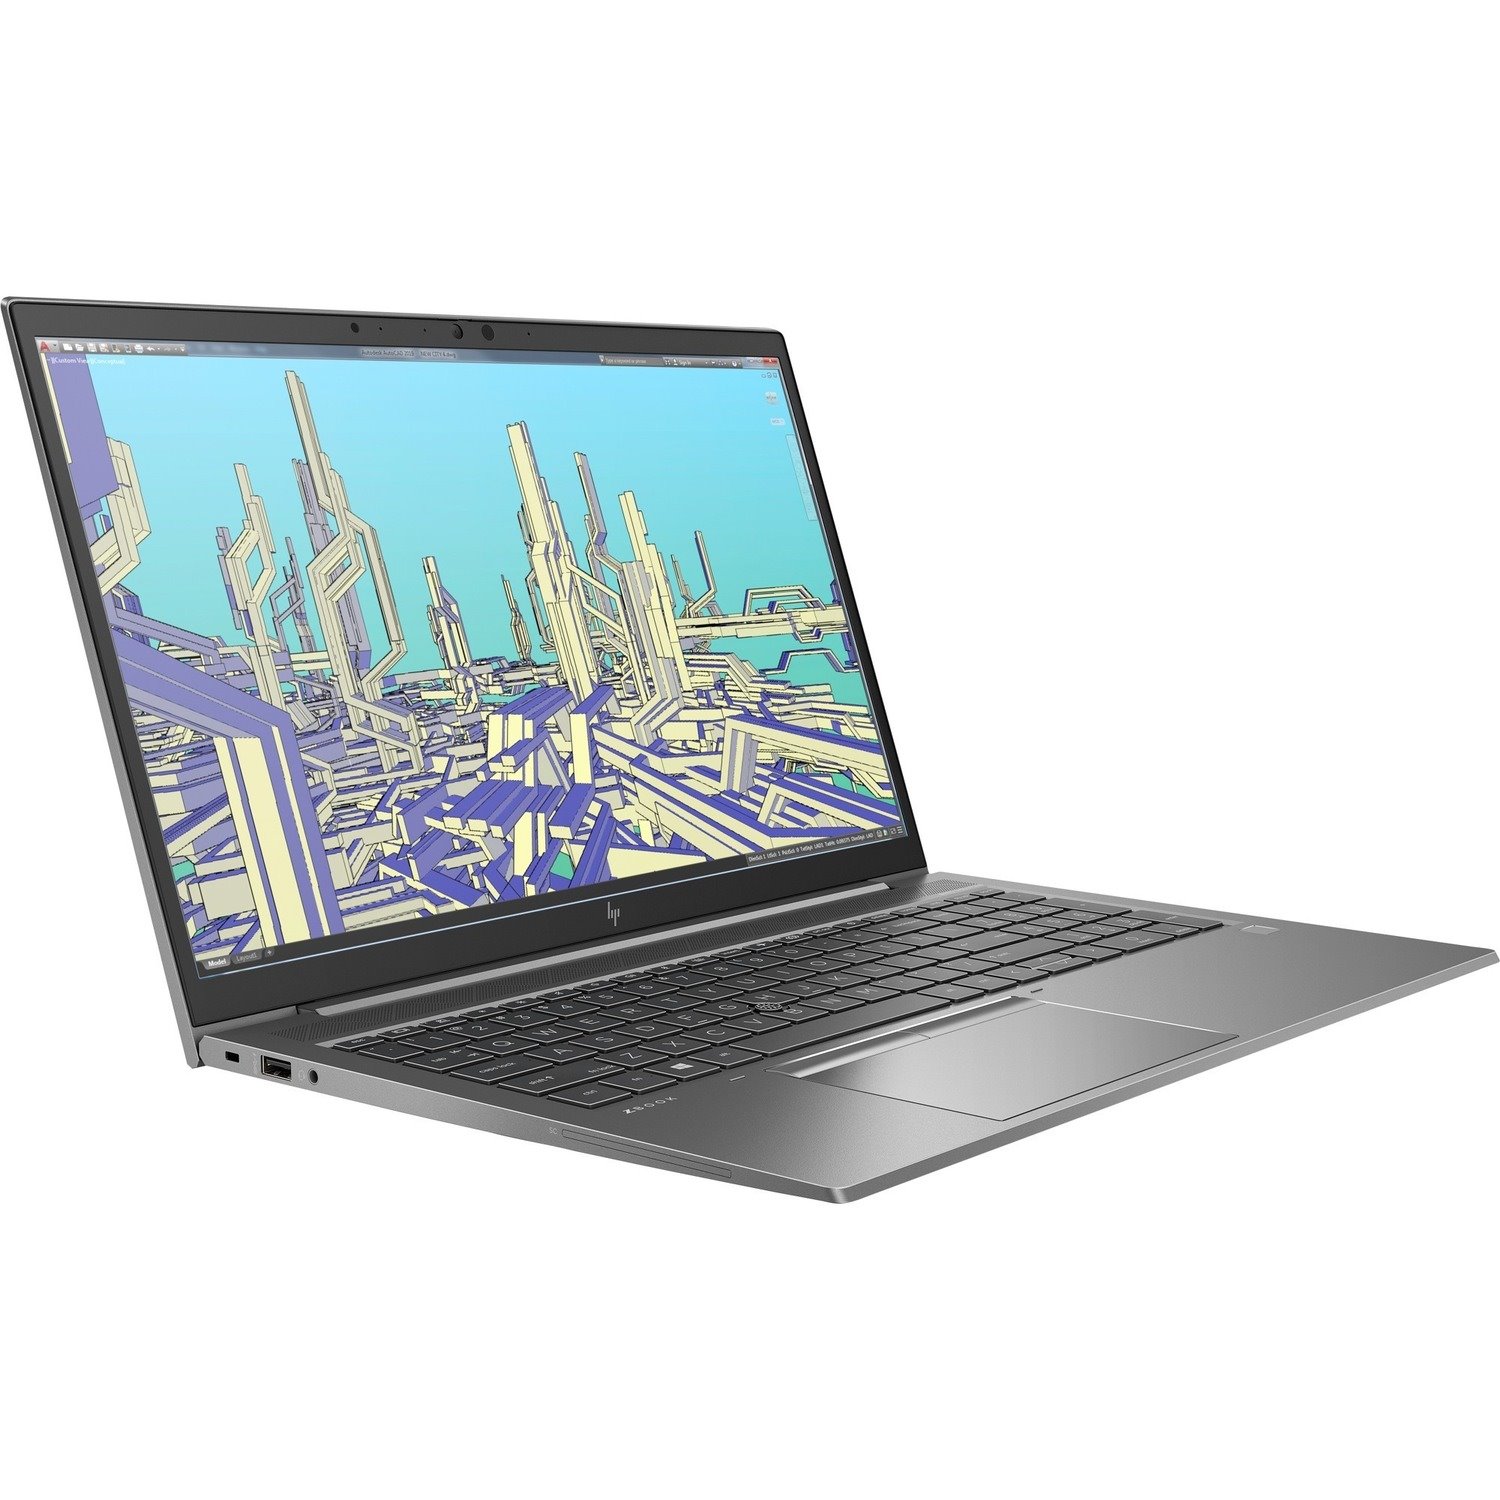 HP ZBook Firefly G8 39.6 cm (15.6") Mobile Workstation - Full HD - 1920 x 1080 - Intel Core i5 11th Gen i5-1135G7 Quad-core (4 Core) 2.40 GHz - 16 GB Total RAM - 512 GB SSD